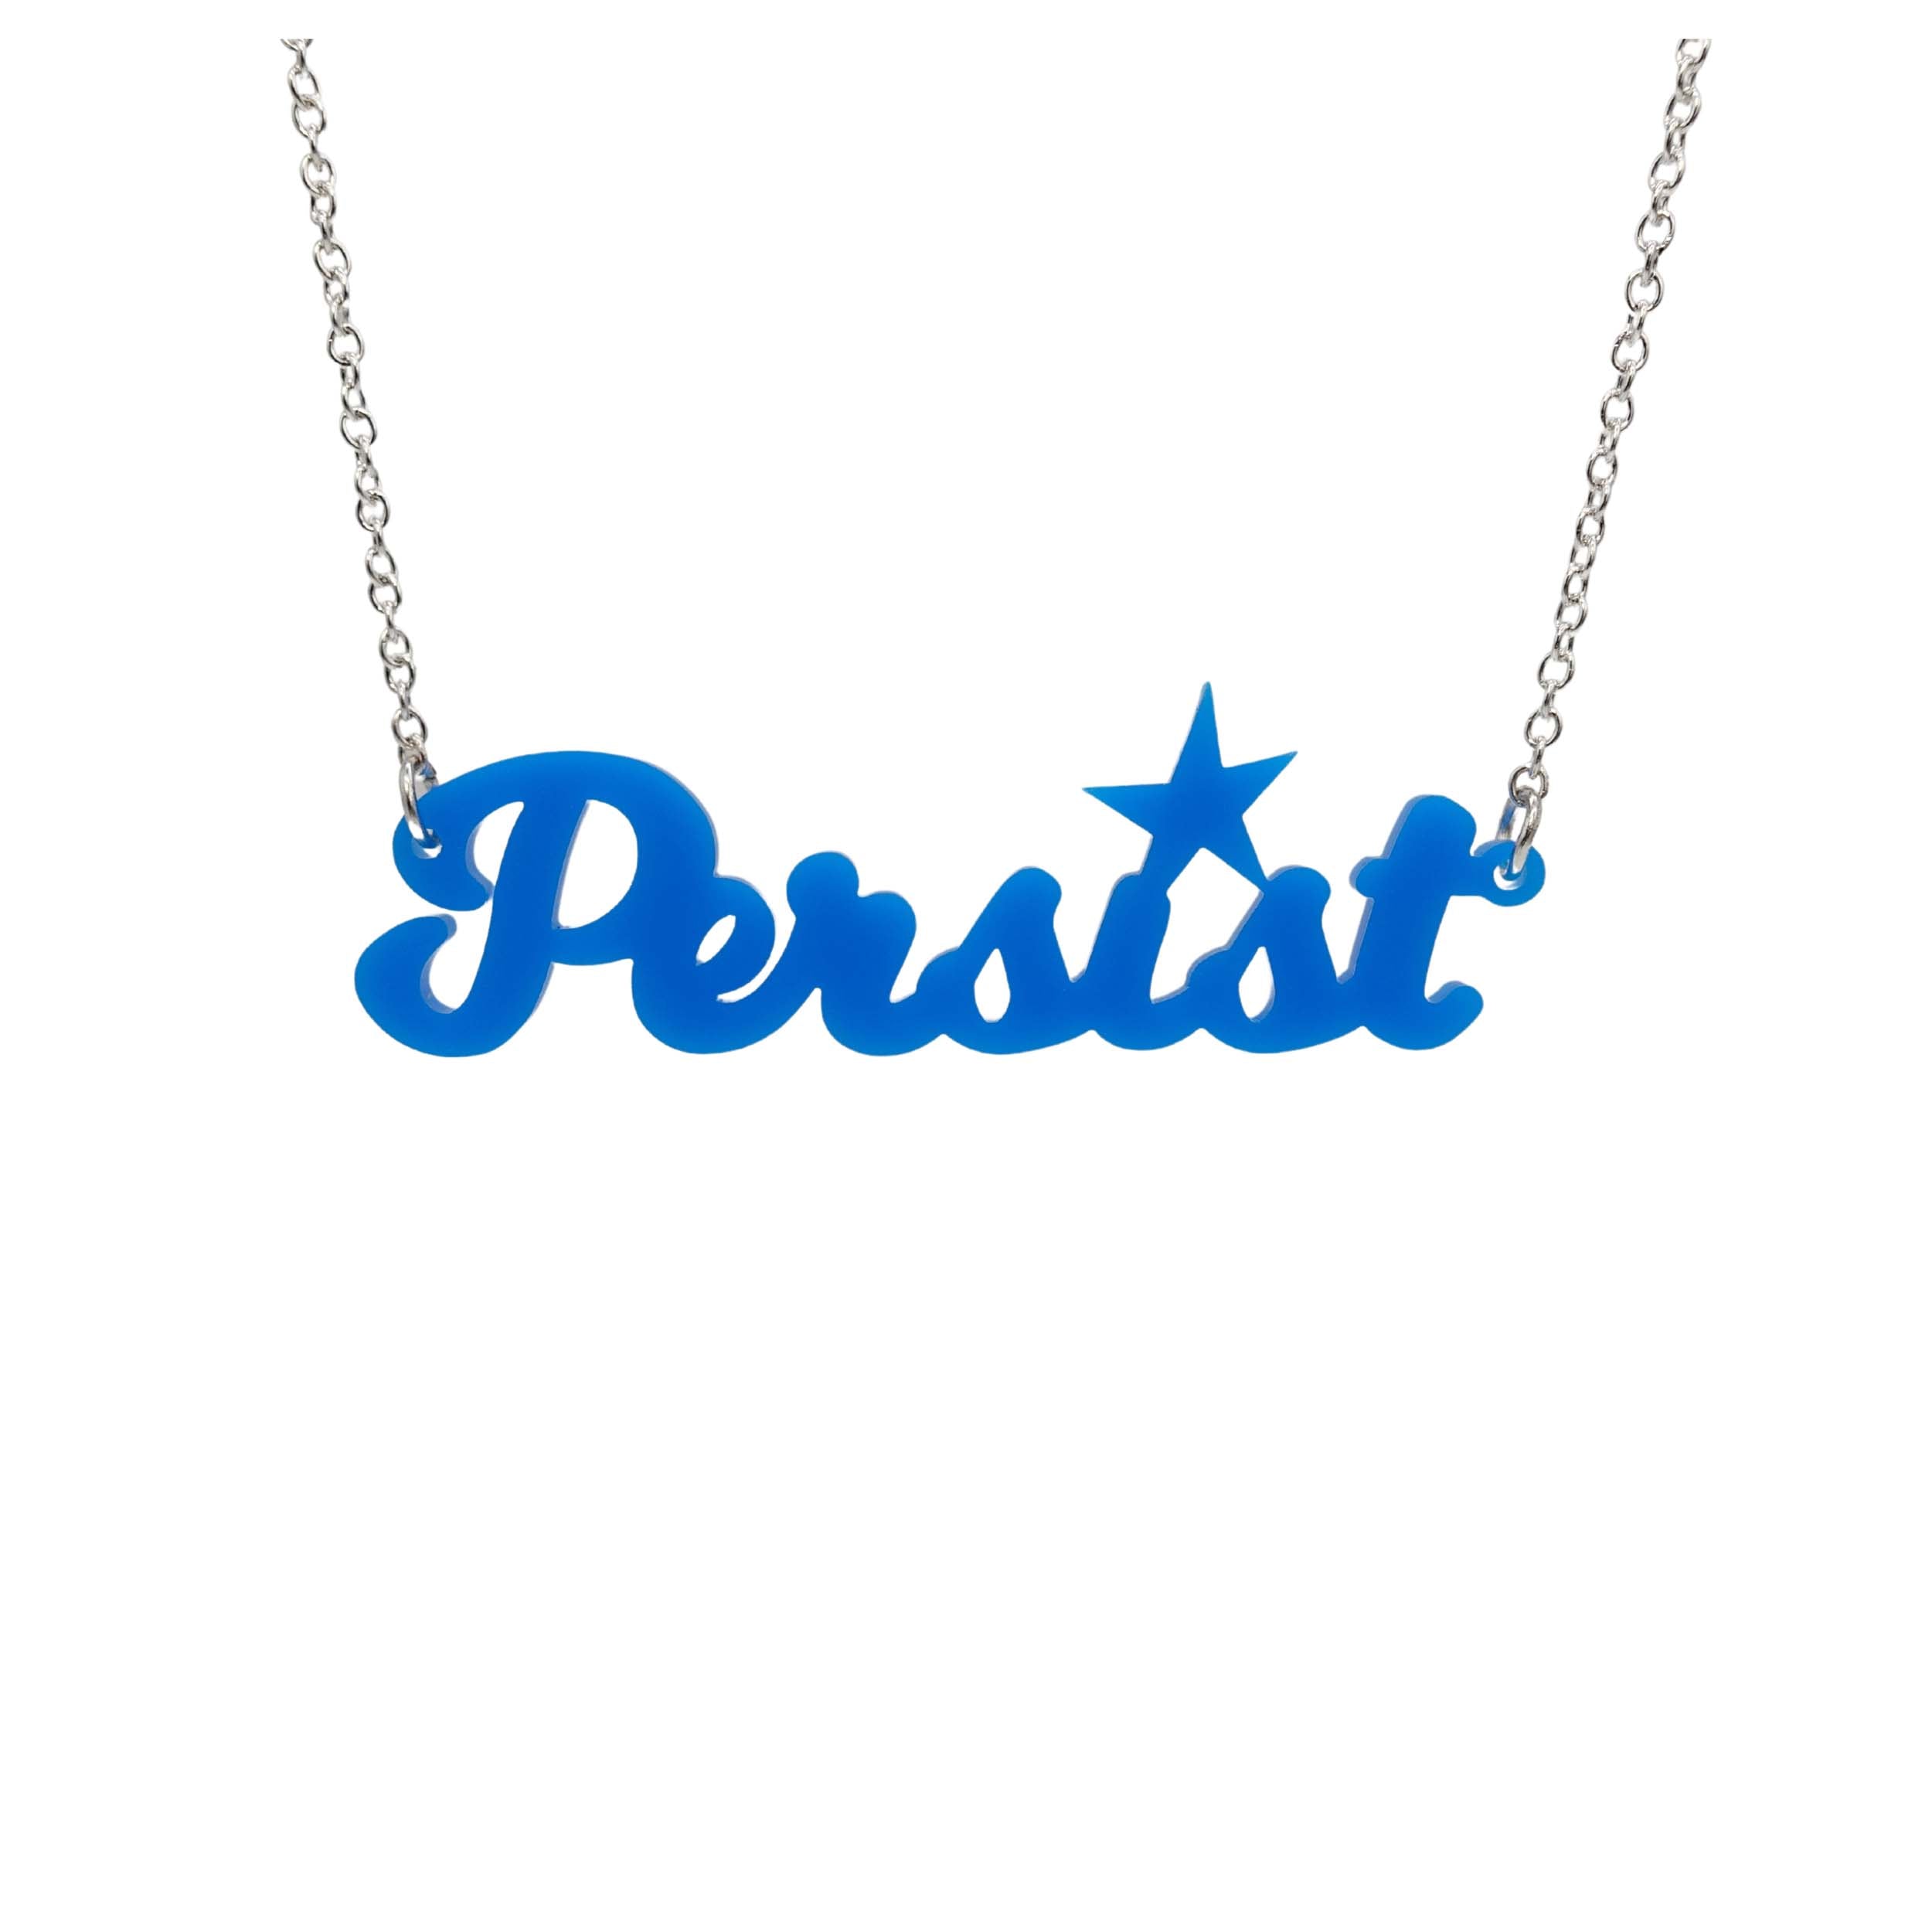 Bright blue script Persist necklace shown hanging against a white background. 